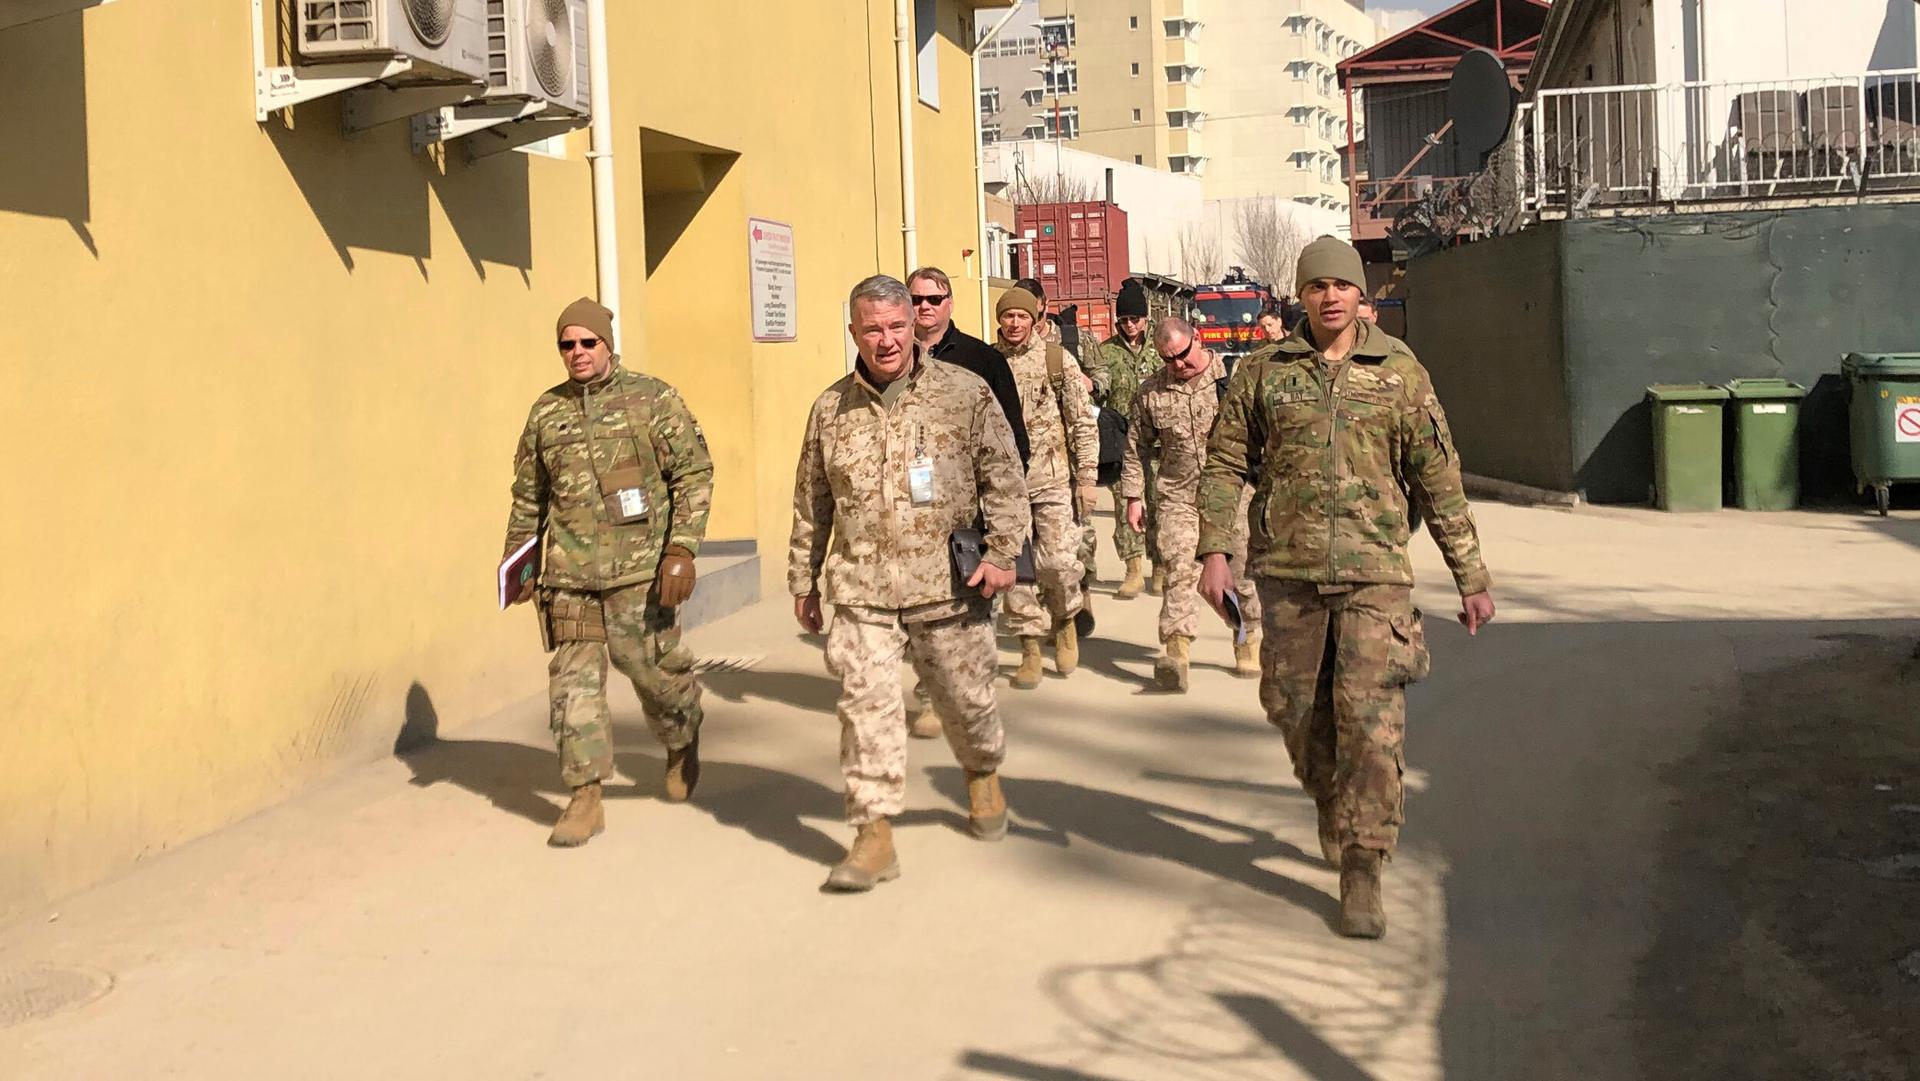 Group of US generals in army fatigues walk through the street in Afghanistan.